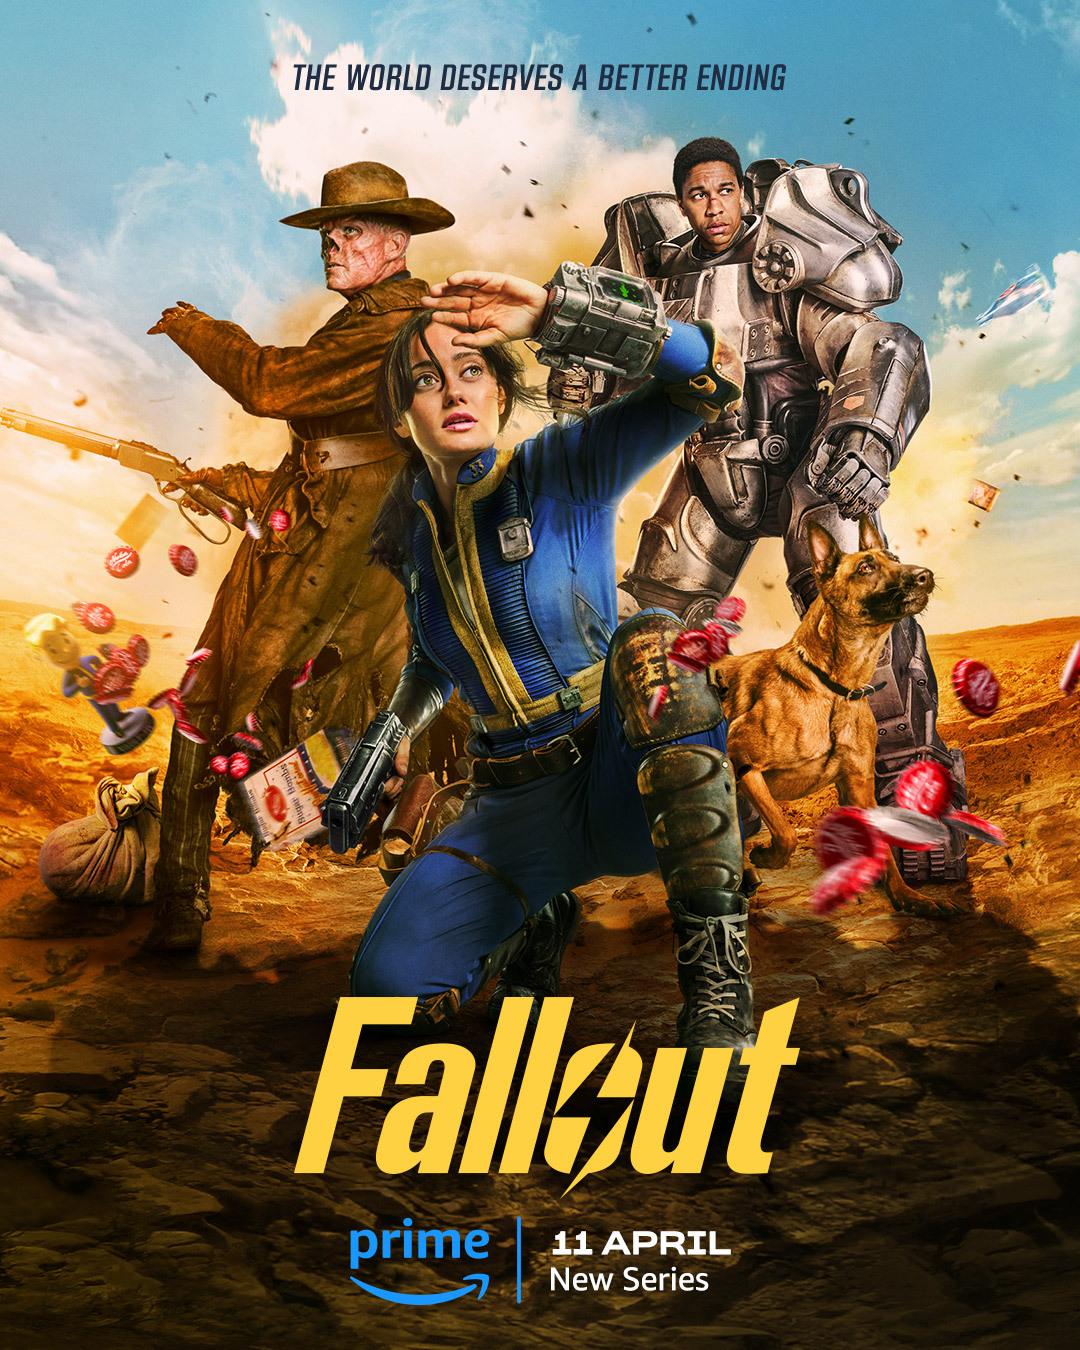 Fallout (April 12, Prime Video)Transporting viewers to a post-apocalyptic Los Angeles, 'Fallout' chronicles the lives of survivors navigating a world ravaged by nuclear catastrophe. Adventure, dark comedy, and the quest for survival converge in this gripping series based on the acclaimed video game franchise.